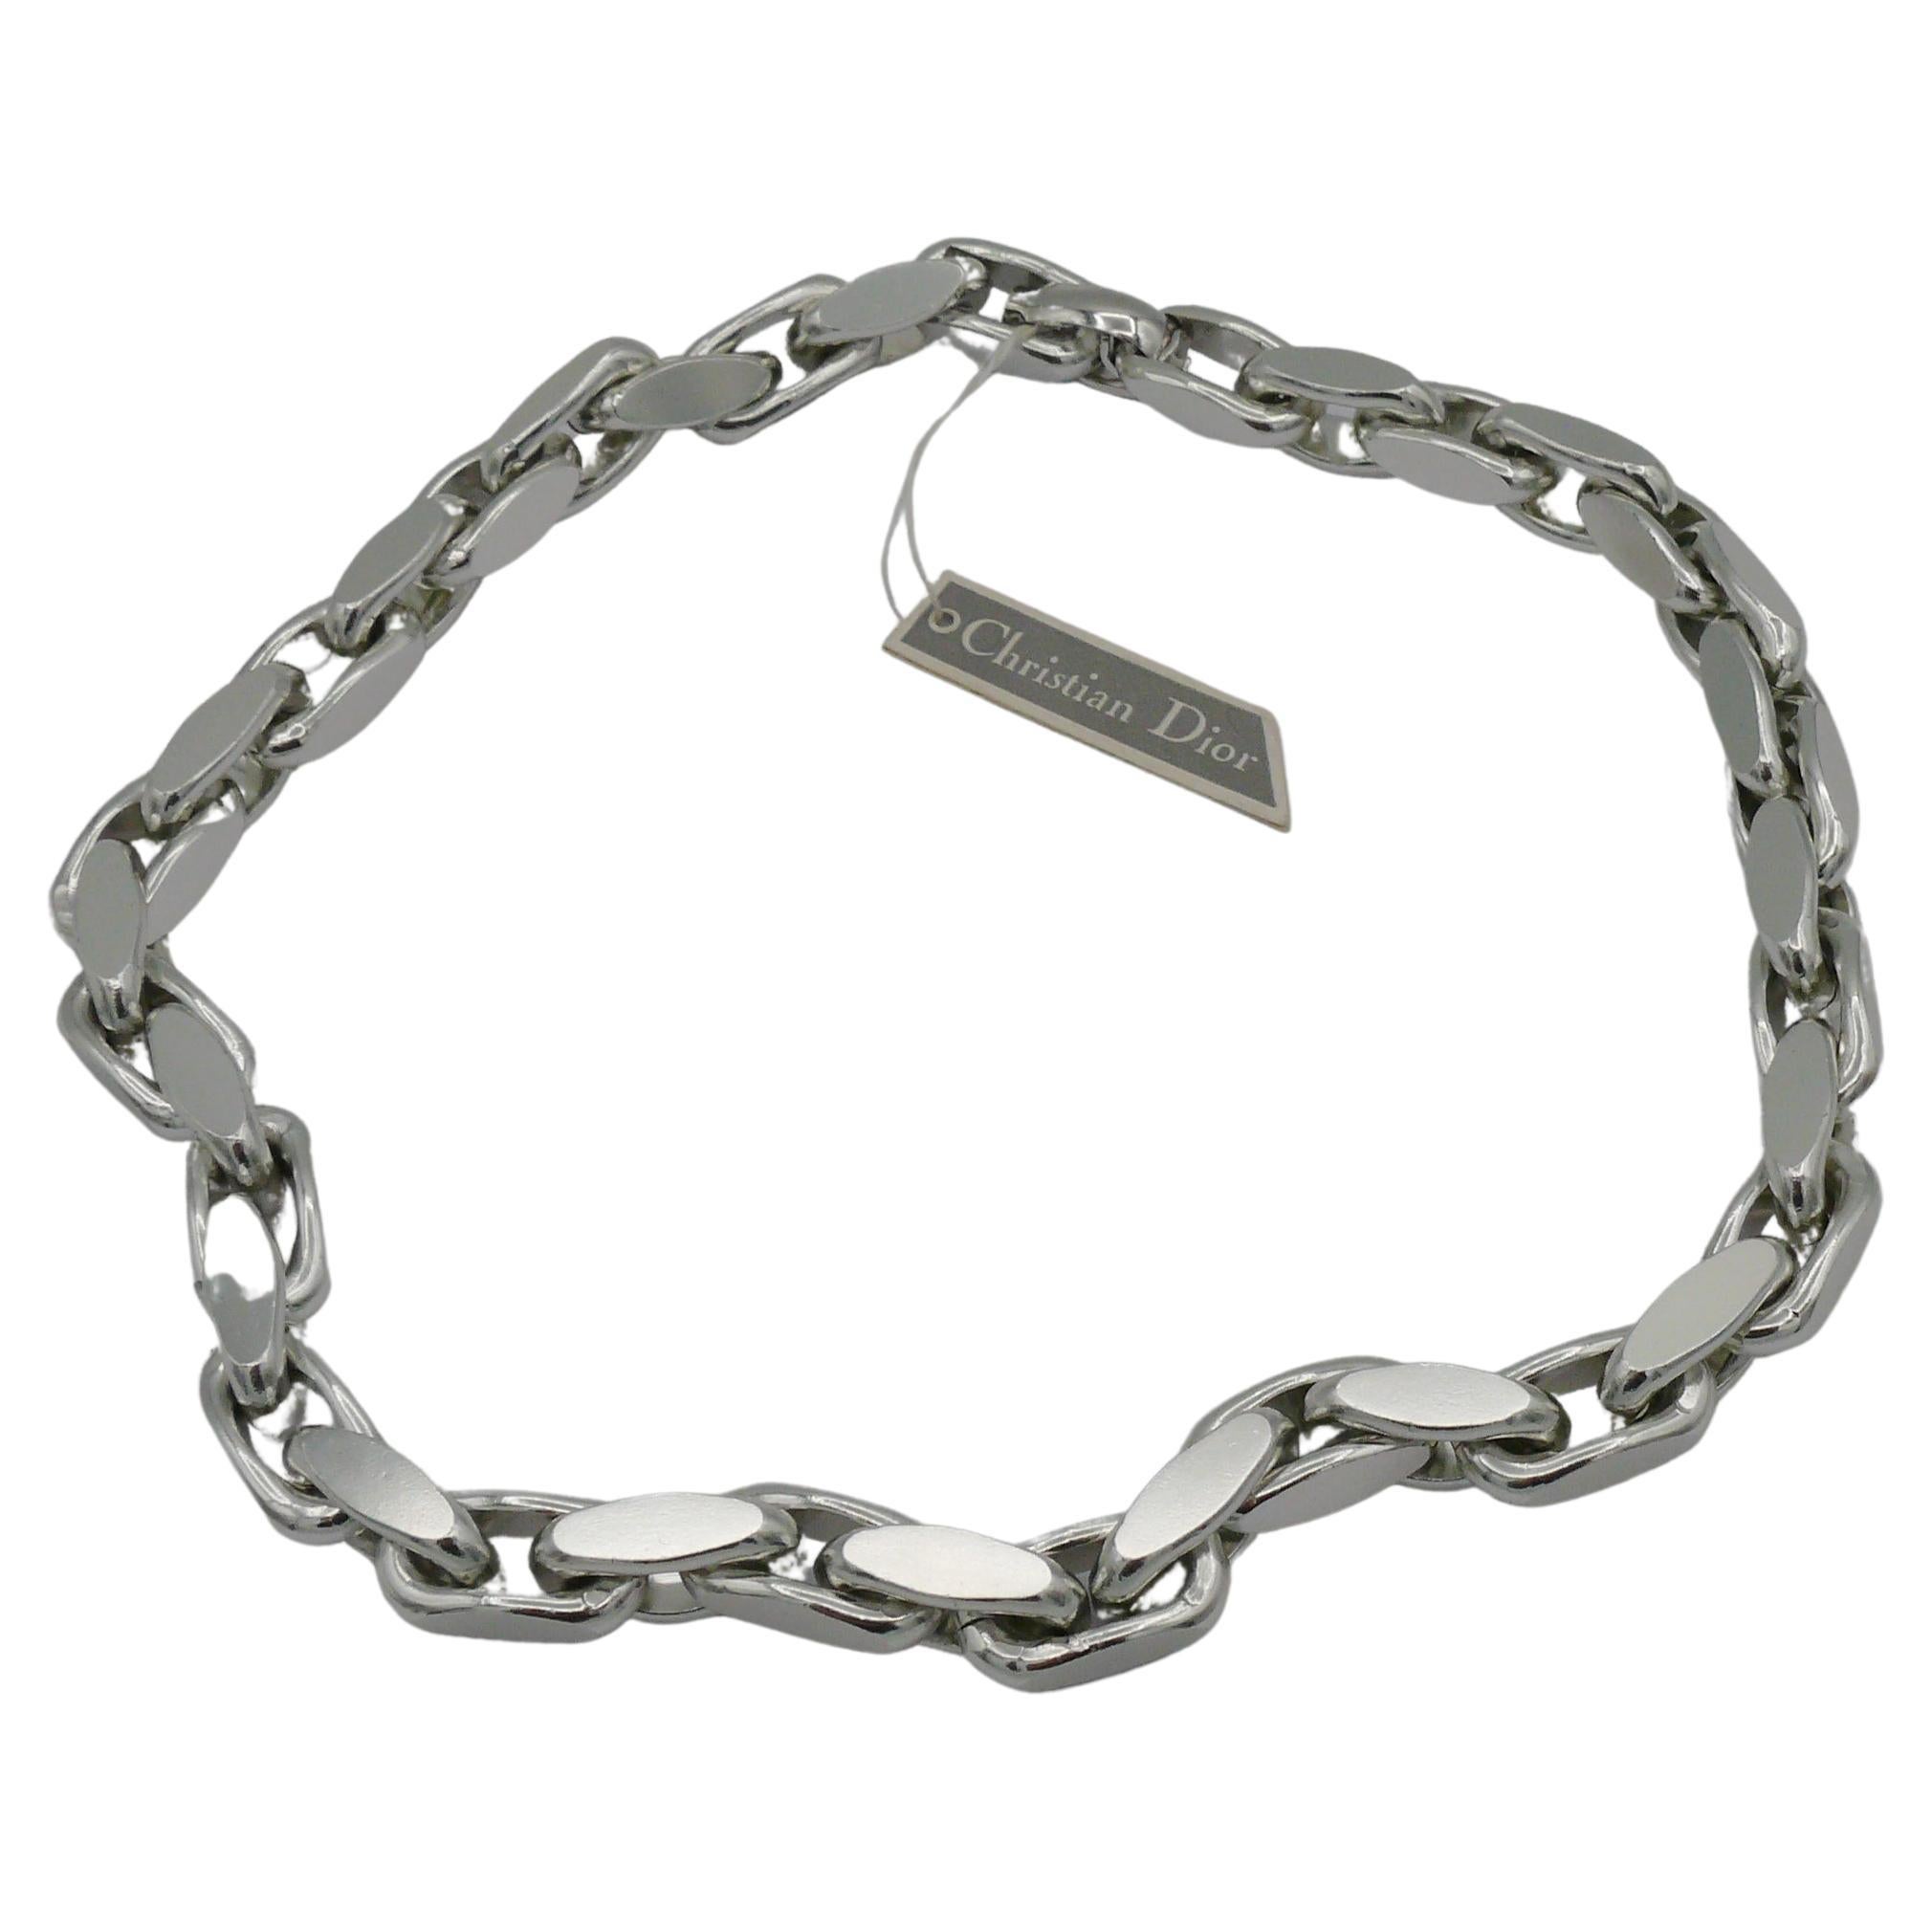 CHRISTIAN DIOR Vintage Silver Tone Chain Necklace, 1973 For Sale